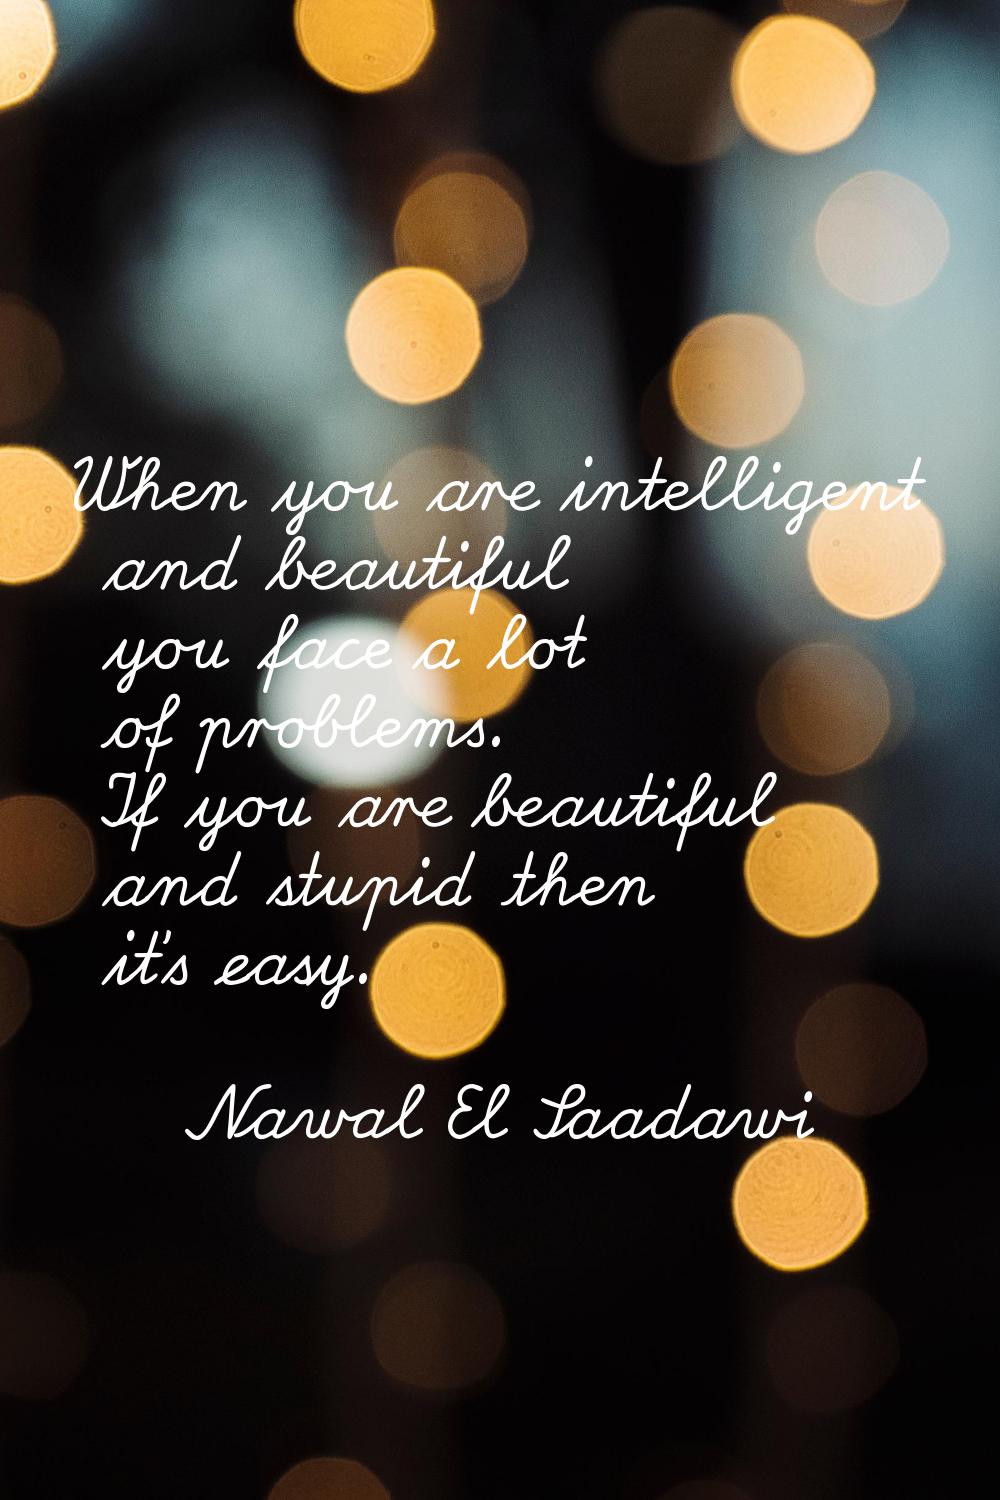 When you are intelligent and beautiful you face a lot of problems. If you are beautiful and stupid 